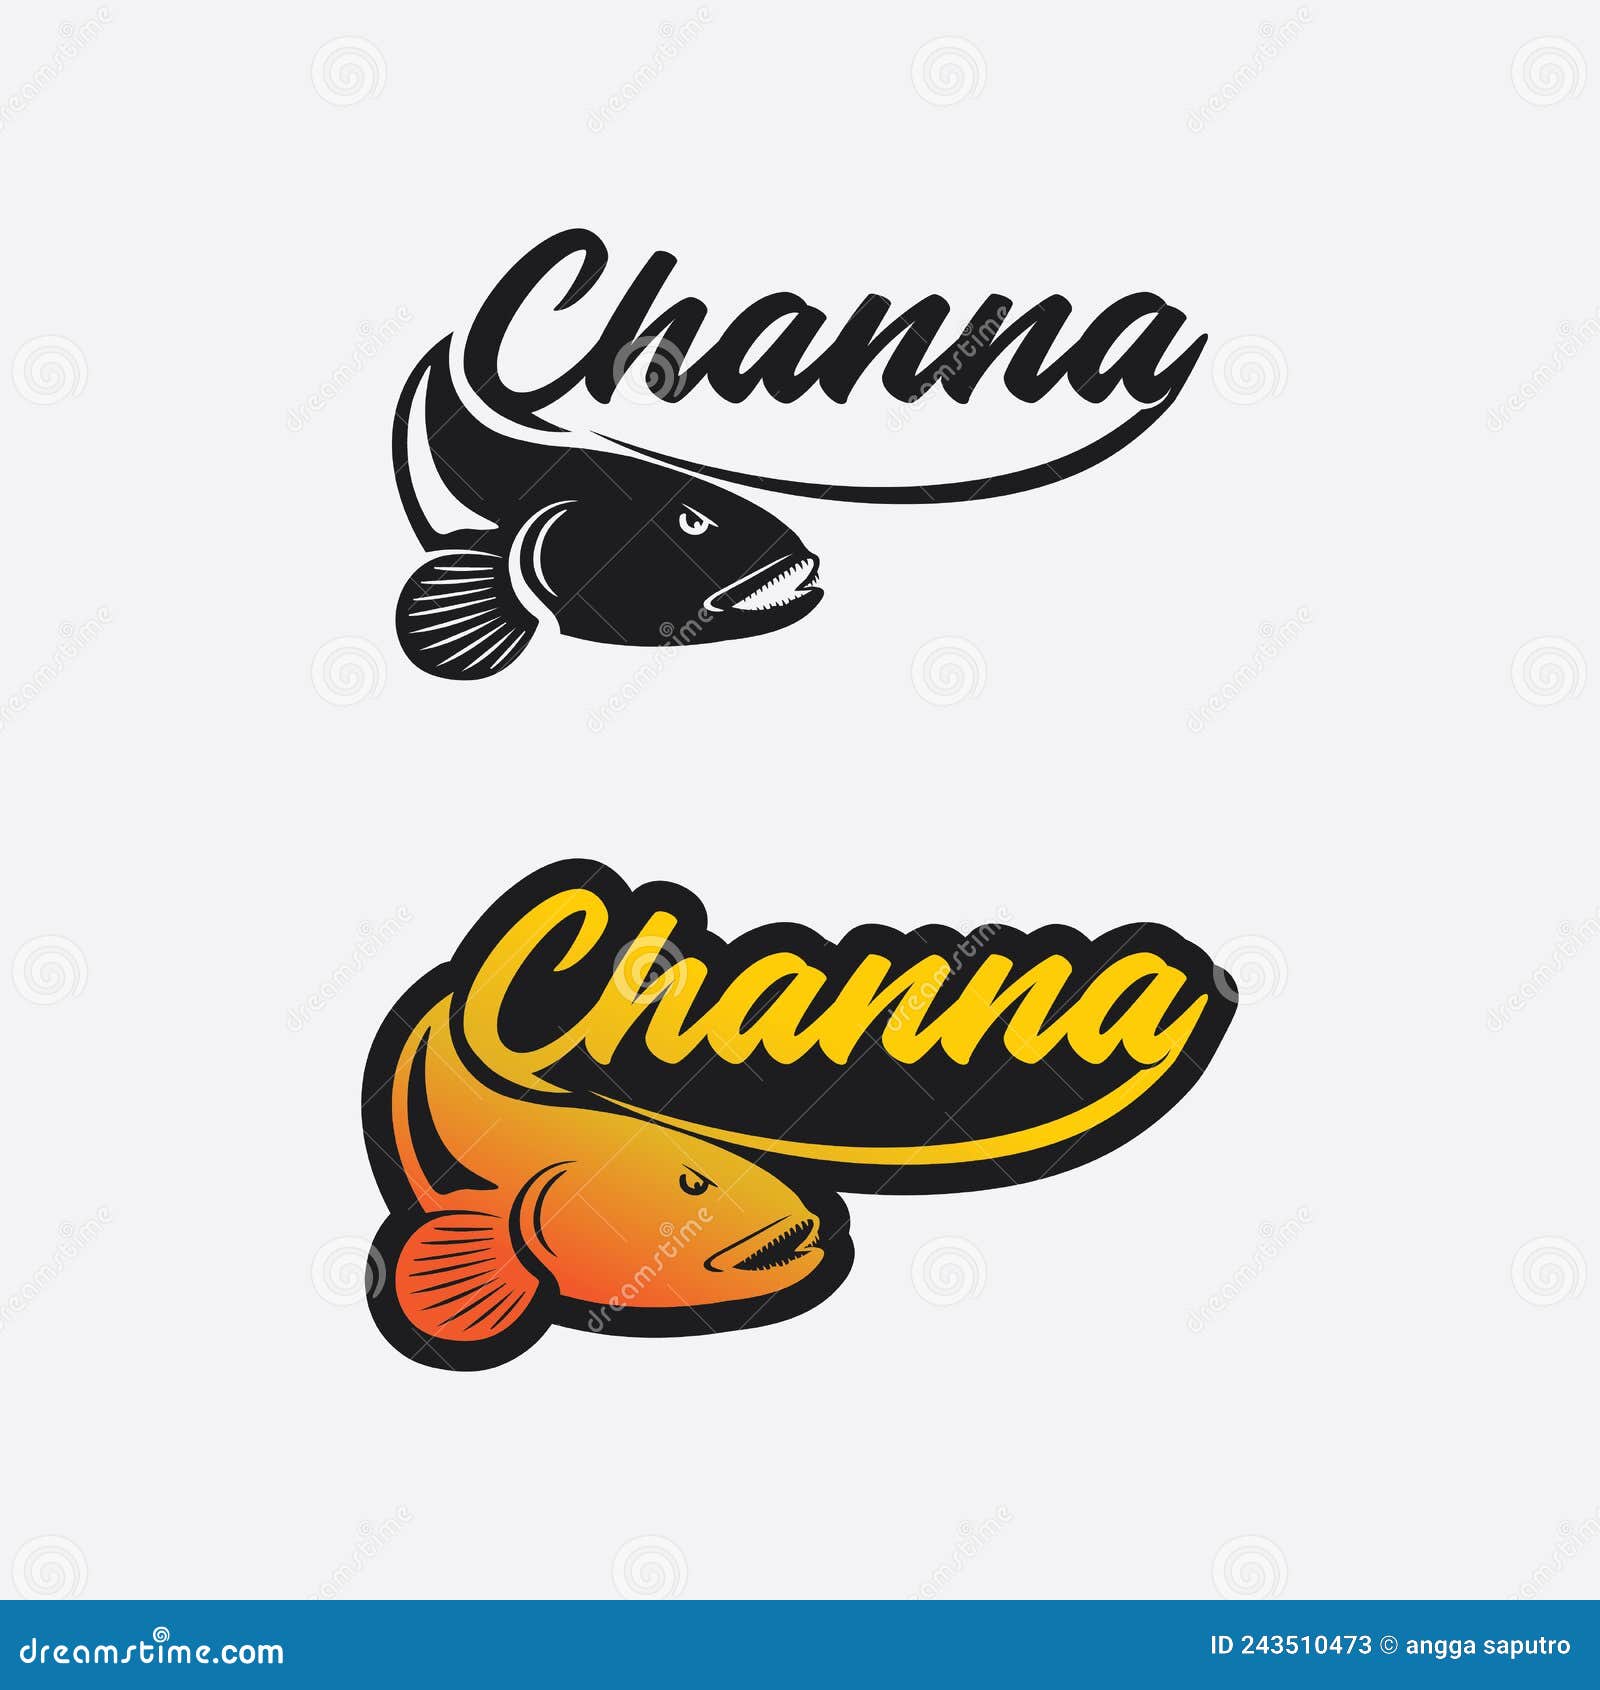 Channa designs, themes, templates and downloadable graphic elements on  Dribbble